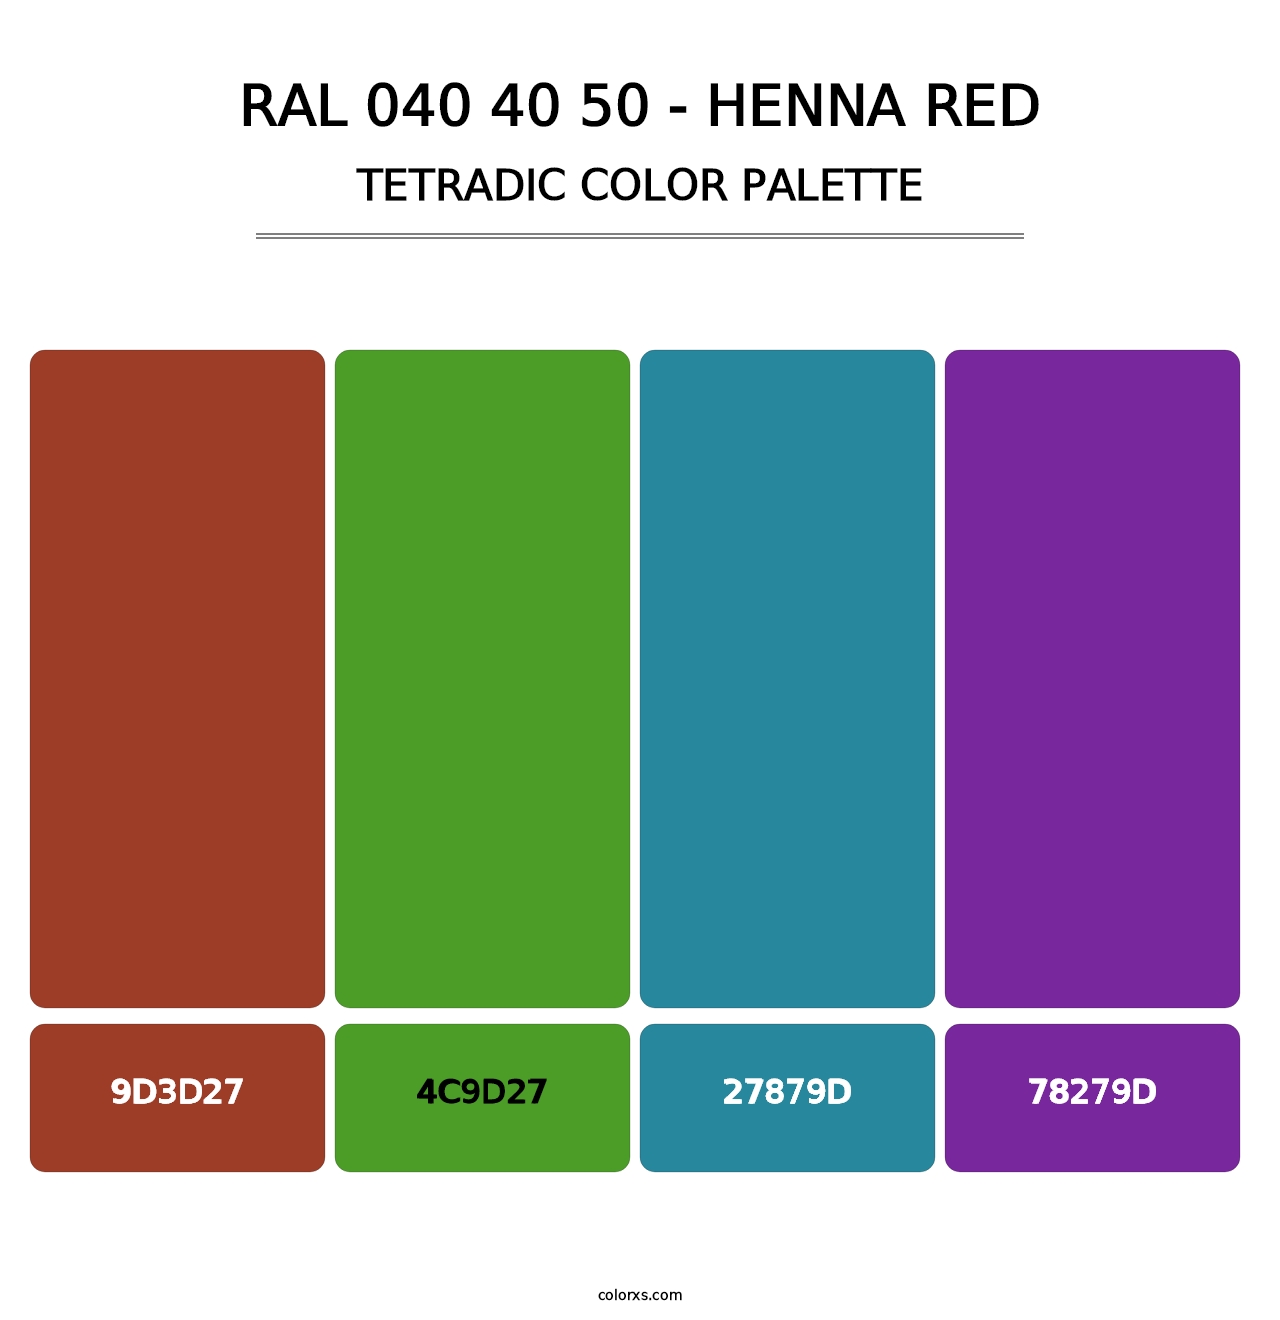 RAL 040 40 50 - Henna Red - Tetradic Color Palette